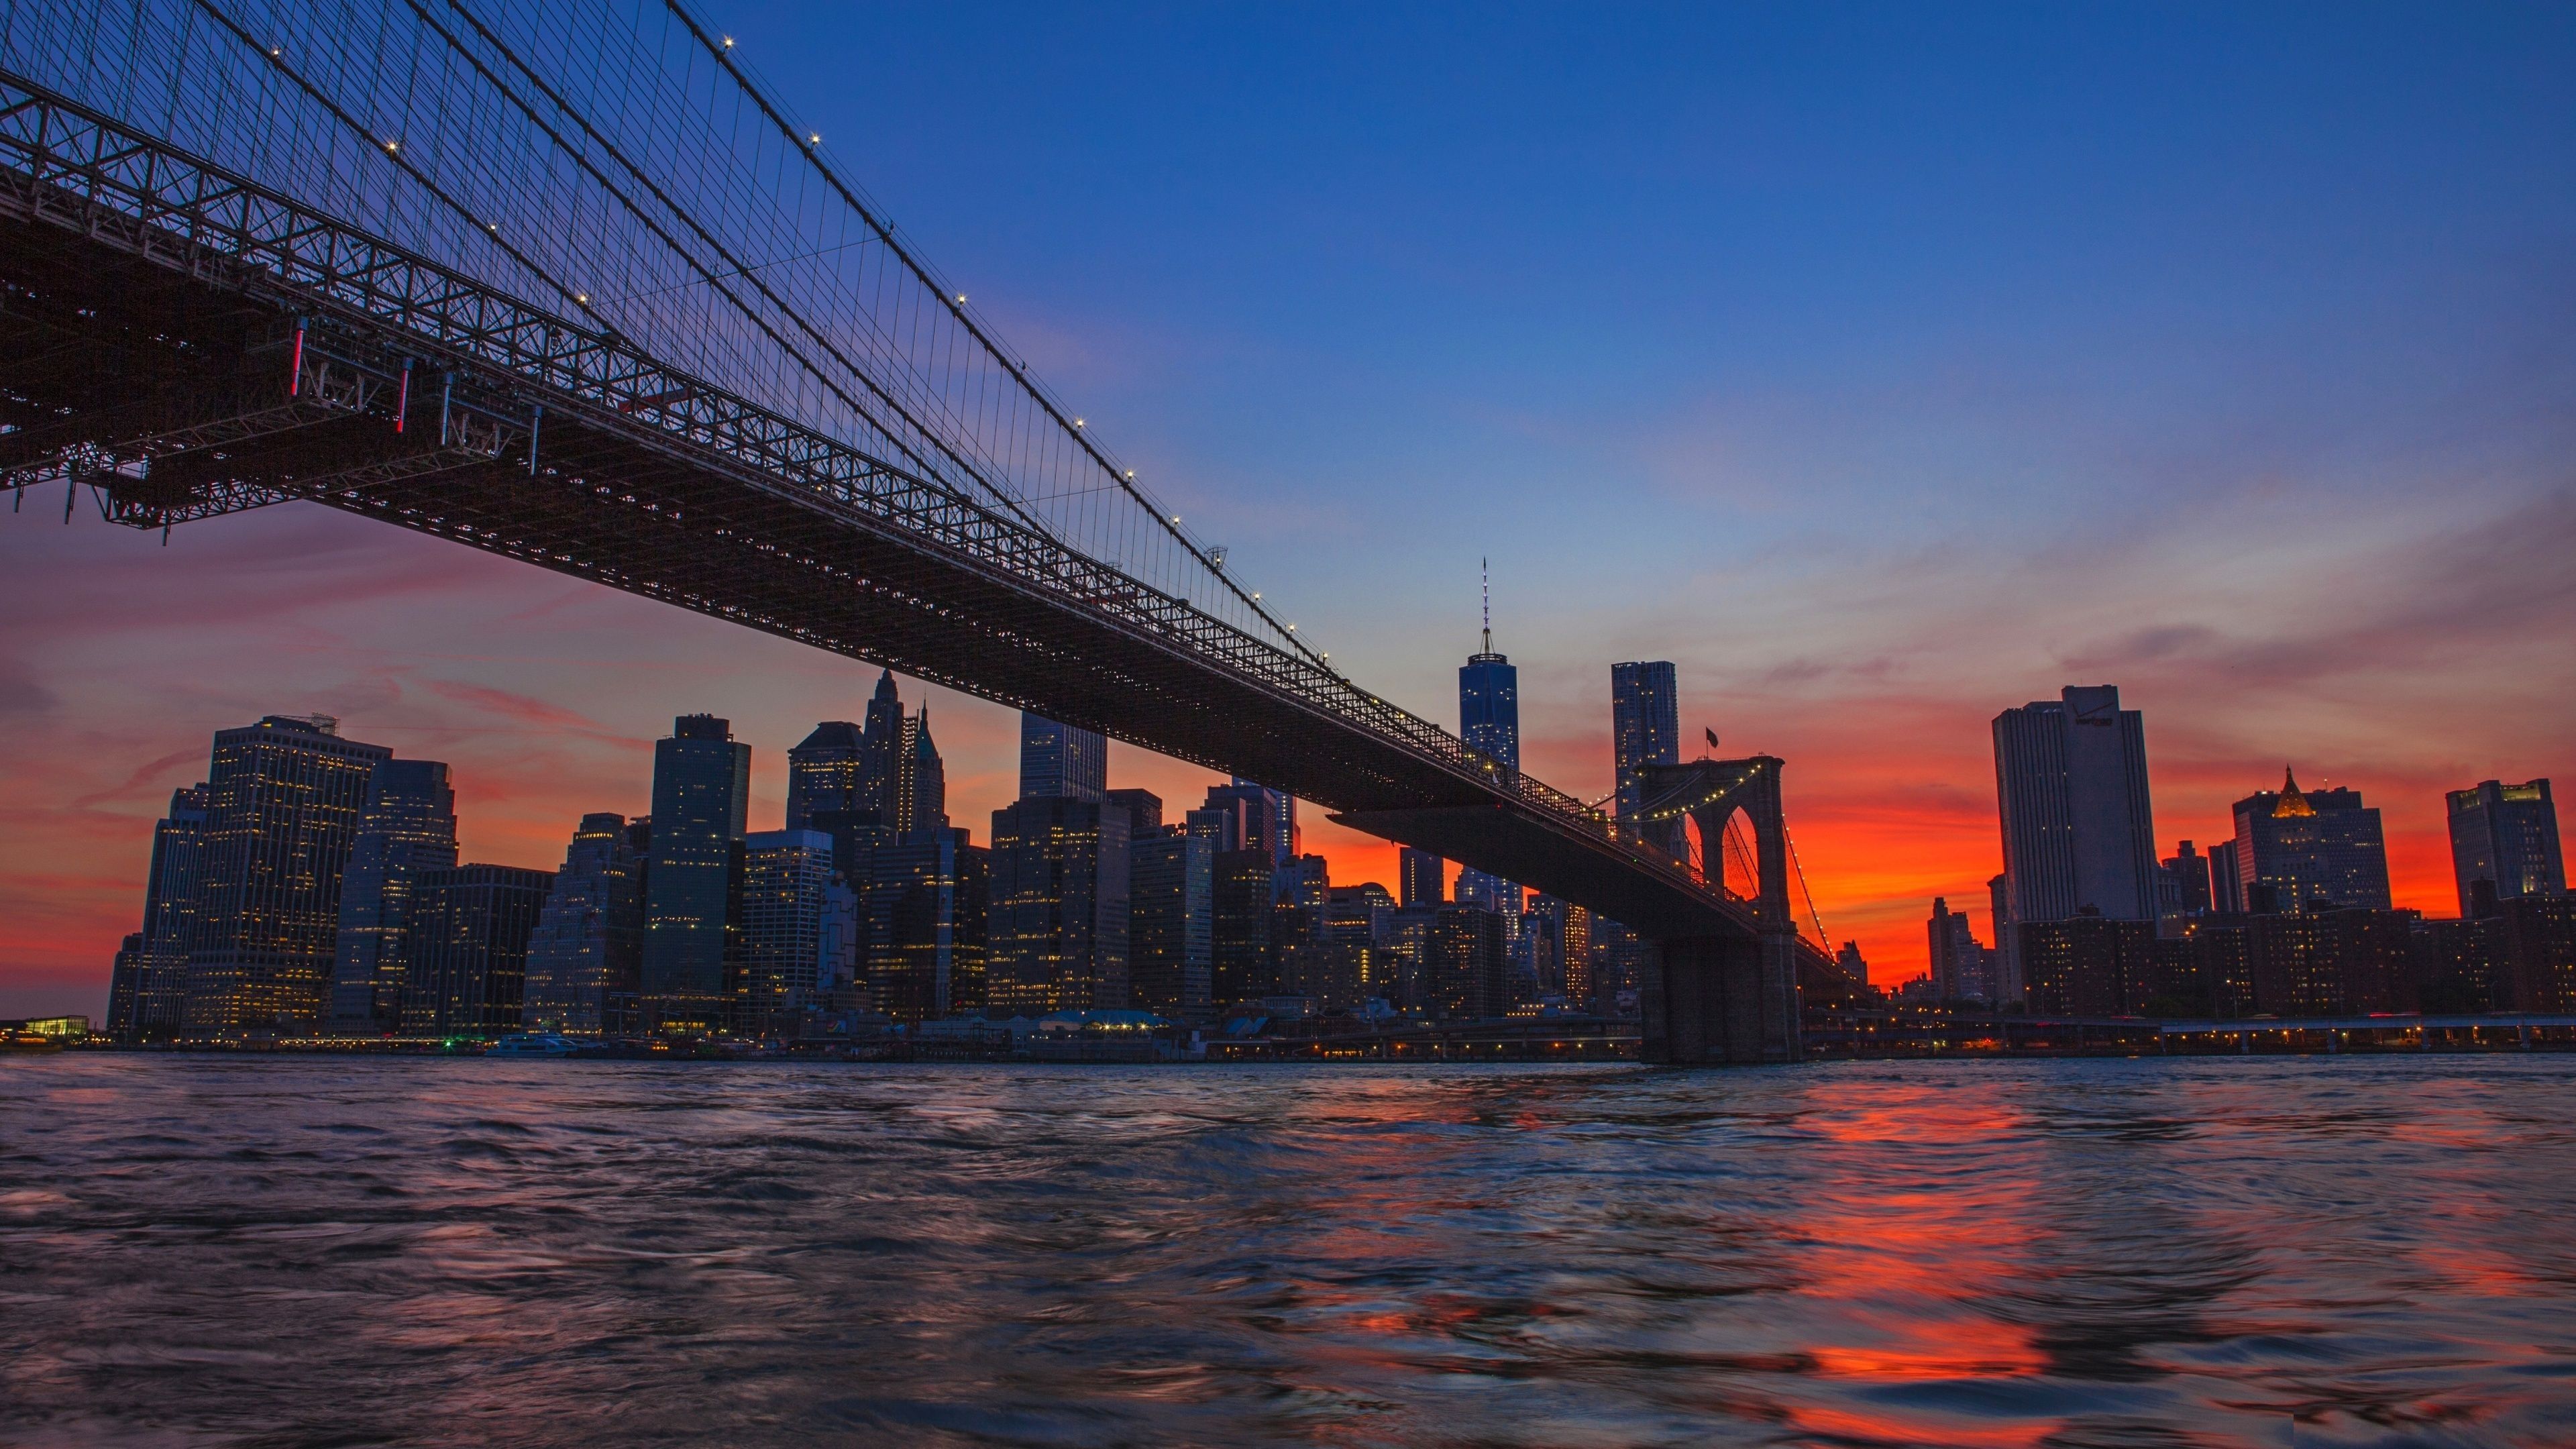 The Brooklyn Bridge spans the East River in New York City, connecting Brooklyn to Manhattan. - New York